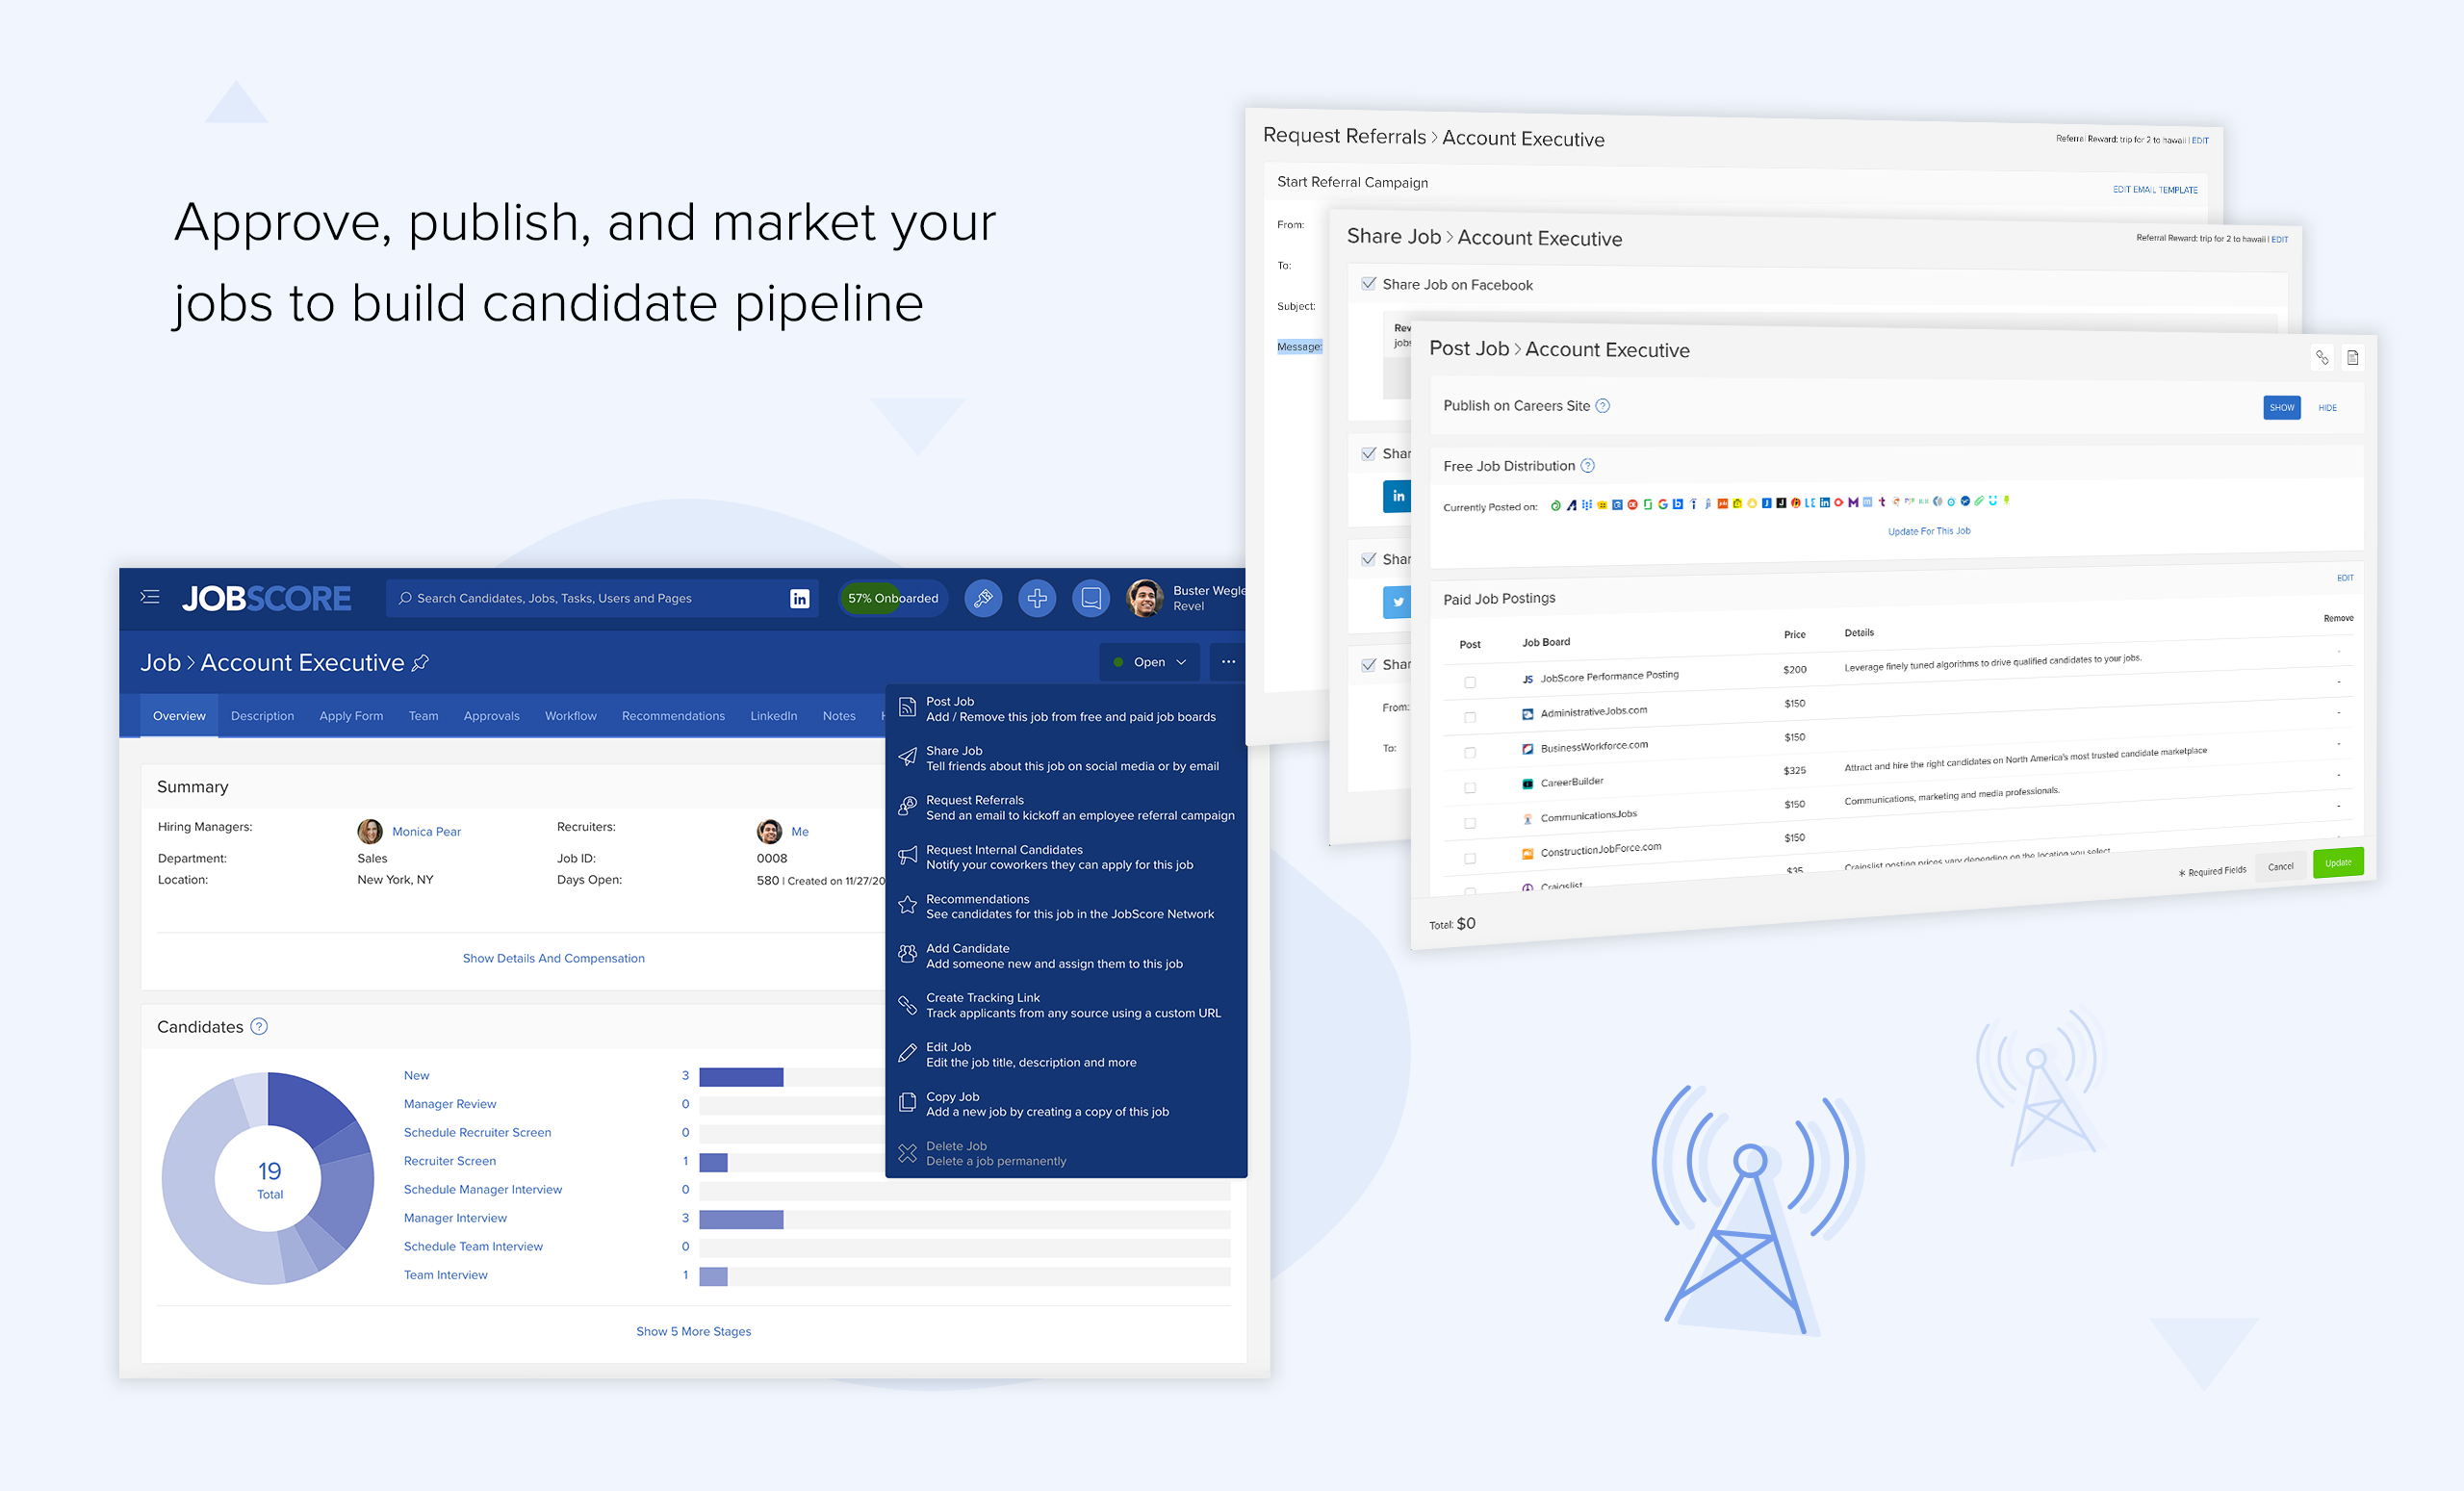 Approve, publish, and market your jobs to build candidate pipeline
